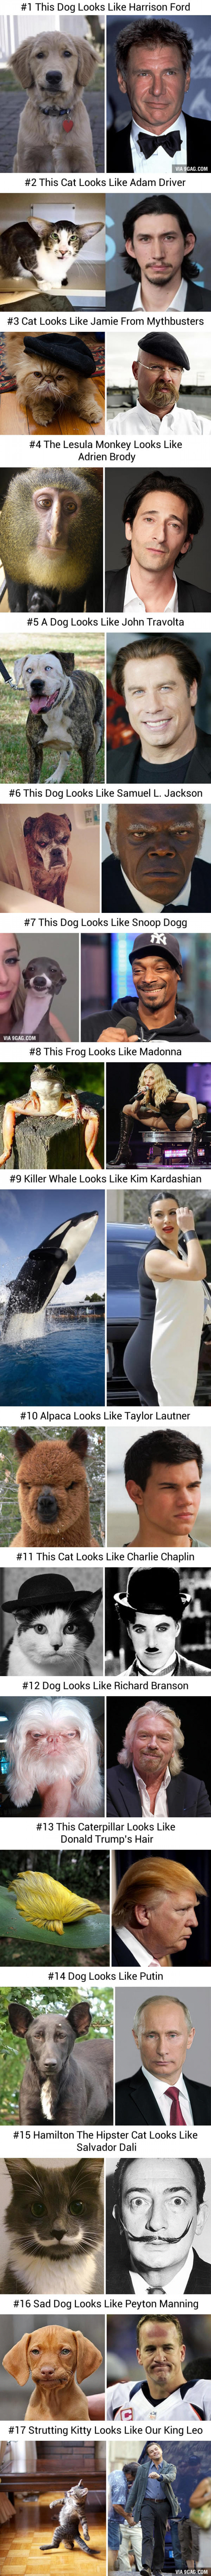 17 Animals That Look Like Celebrities And Famous People